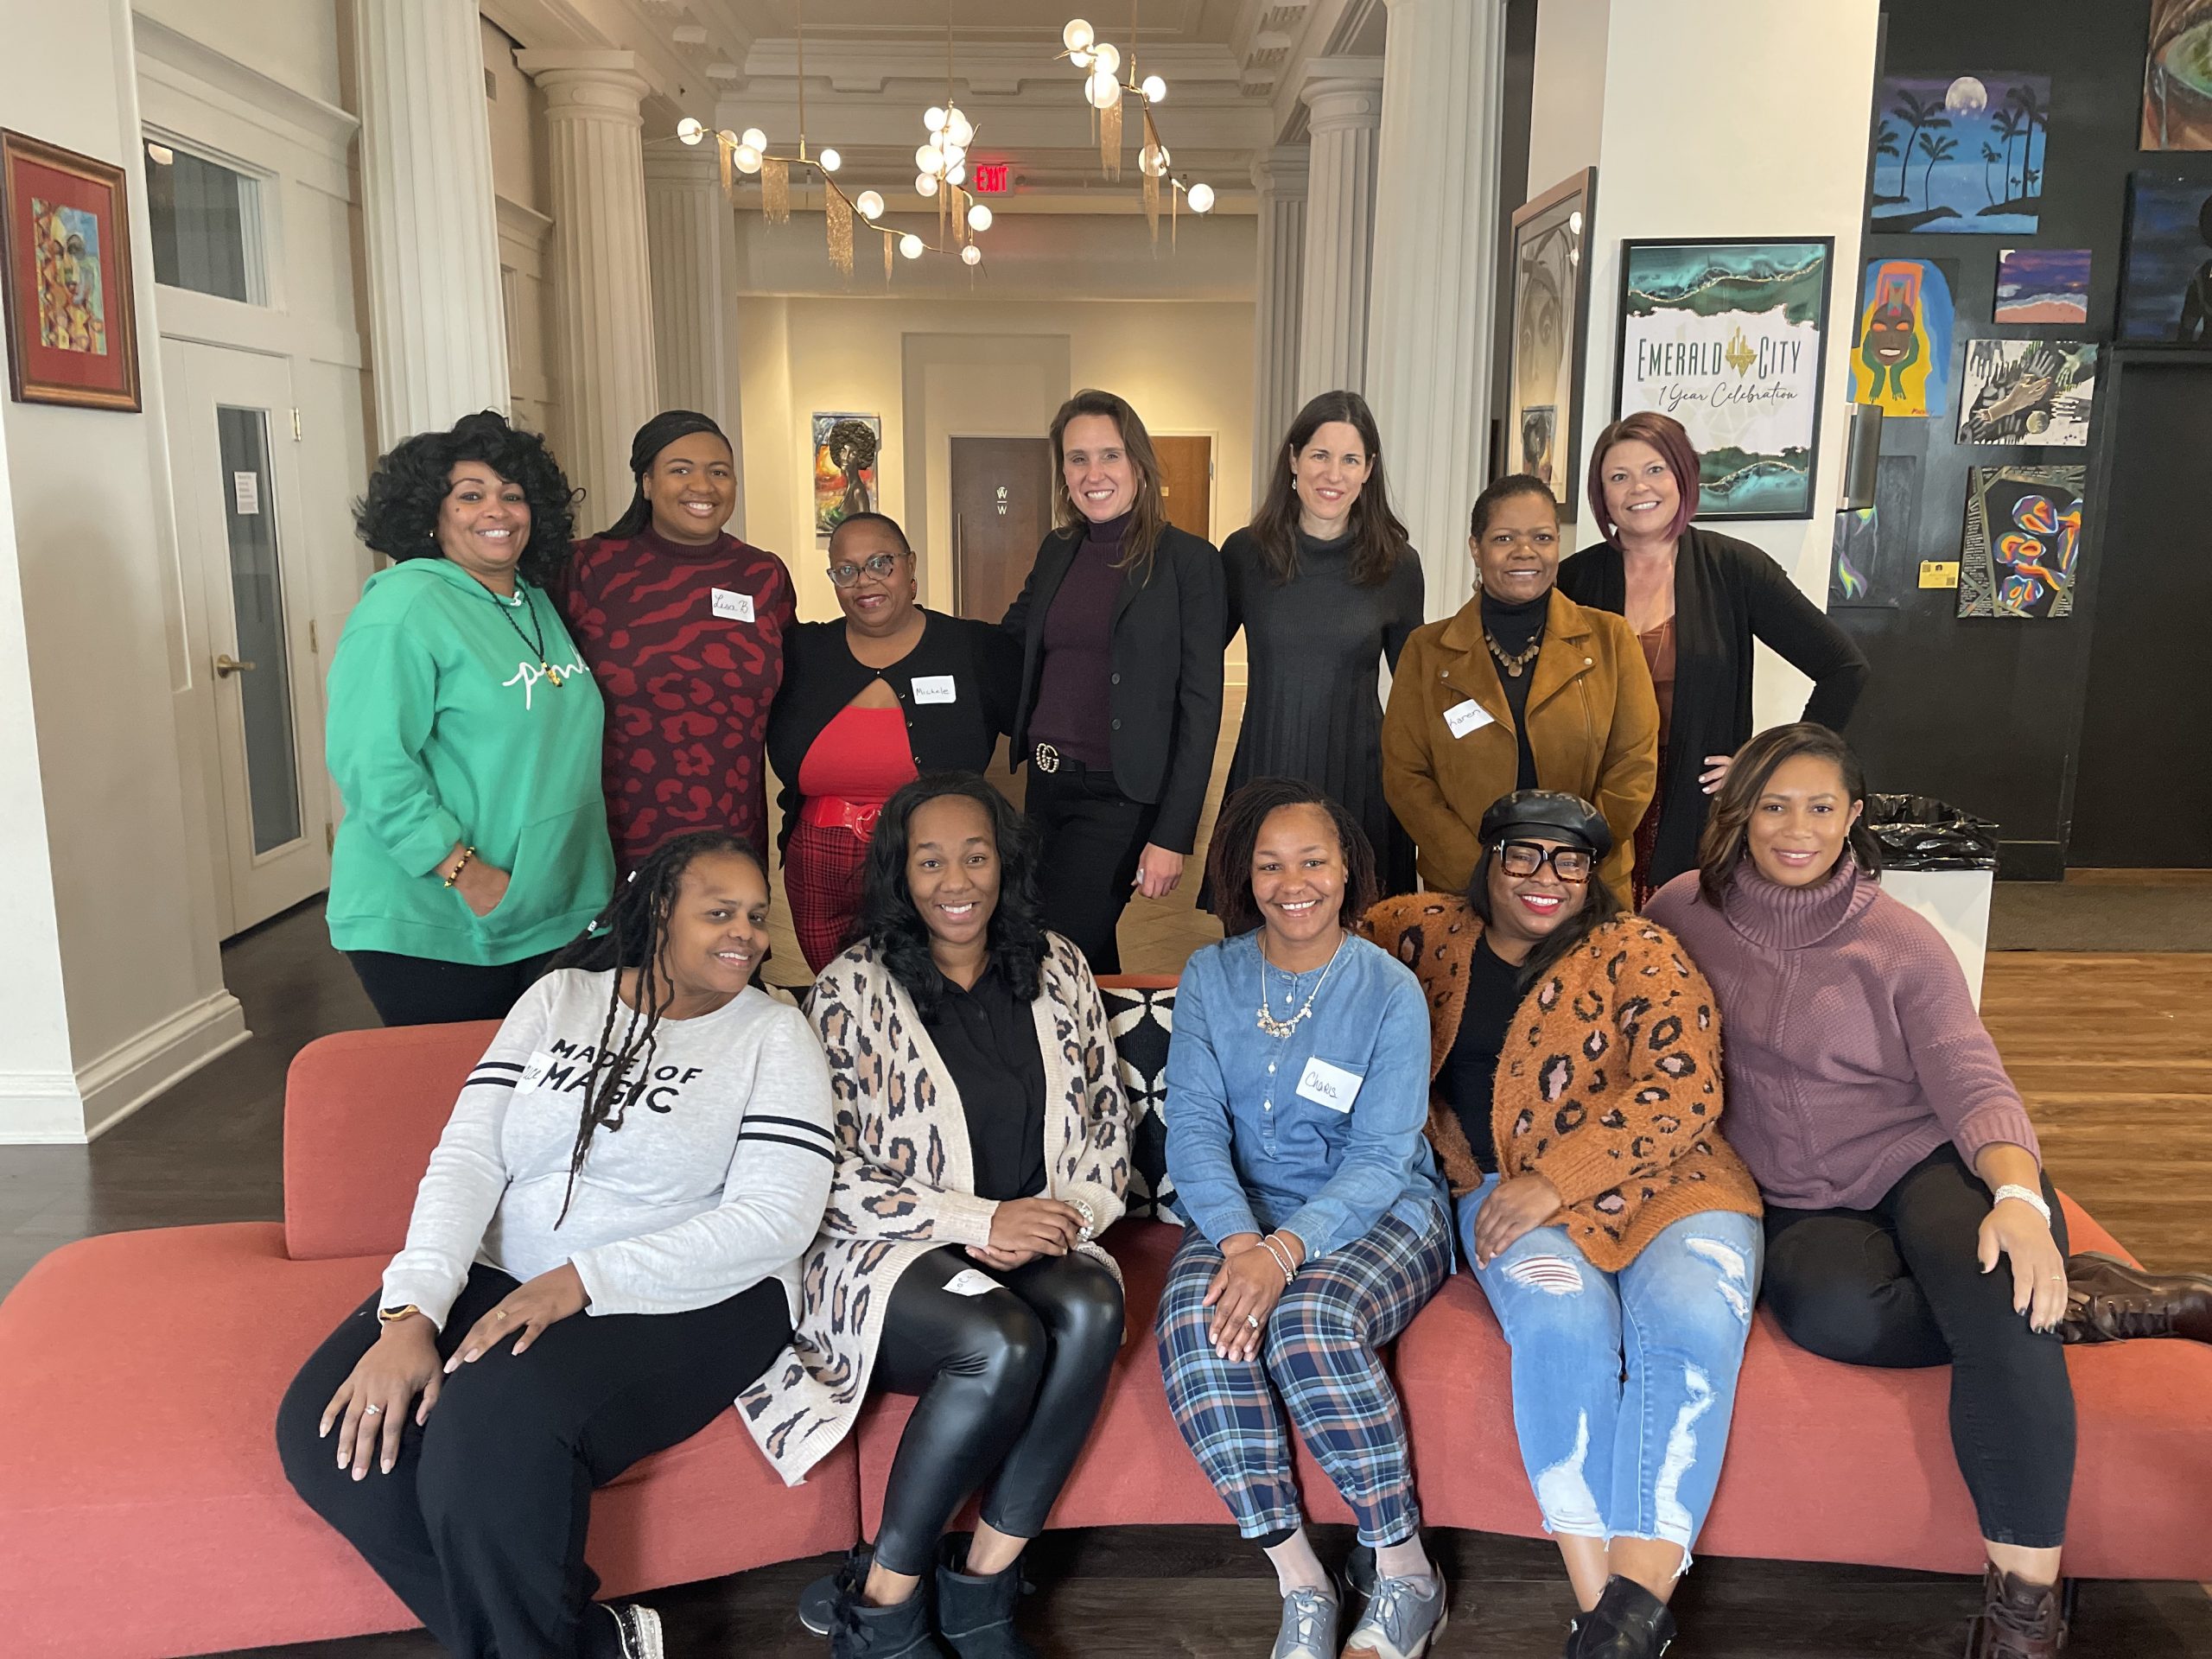 Image of participants, instructors, and Neighborhood Allies staff of the Money Talks program. 5 Black women sit on a light red couch, while 7 more women - 5 Black and 3 white - stand behind the couch. They all smile and pose for the camera. Behind them is a large room with tall ceilings, a chandelier, and white pillars.